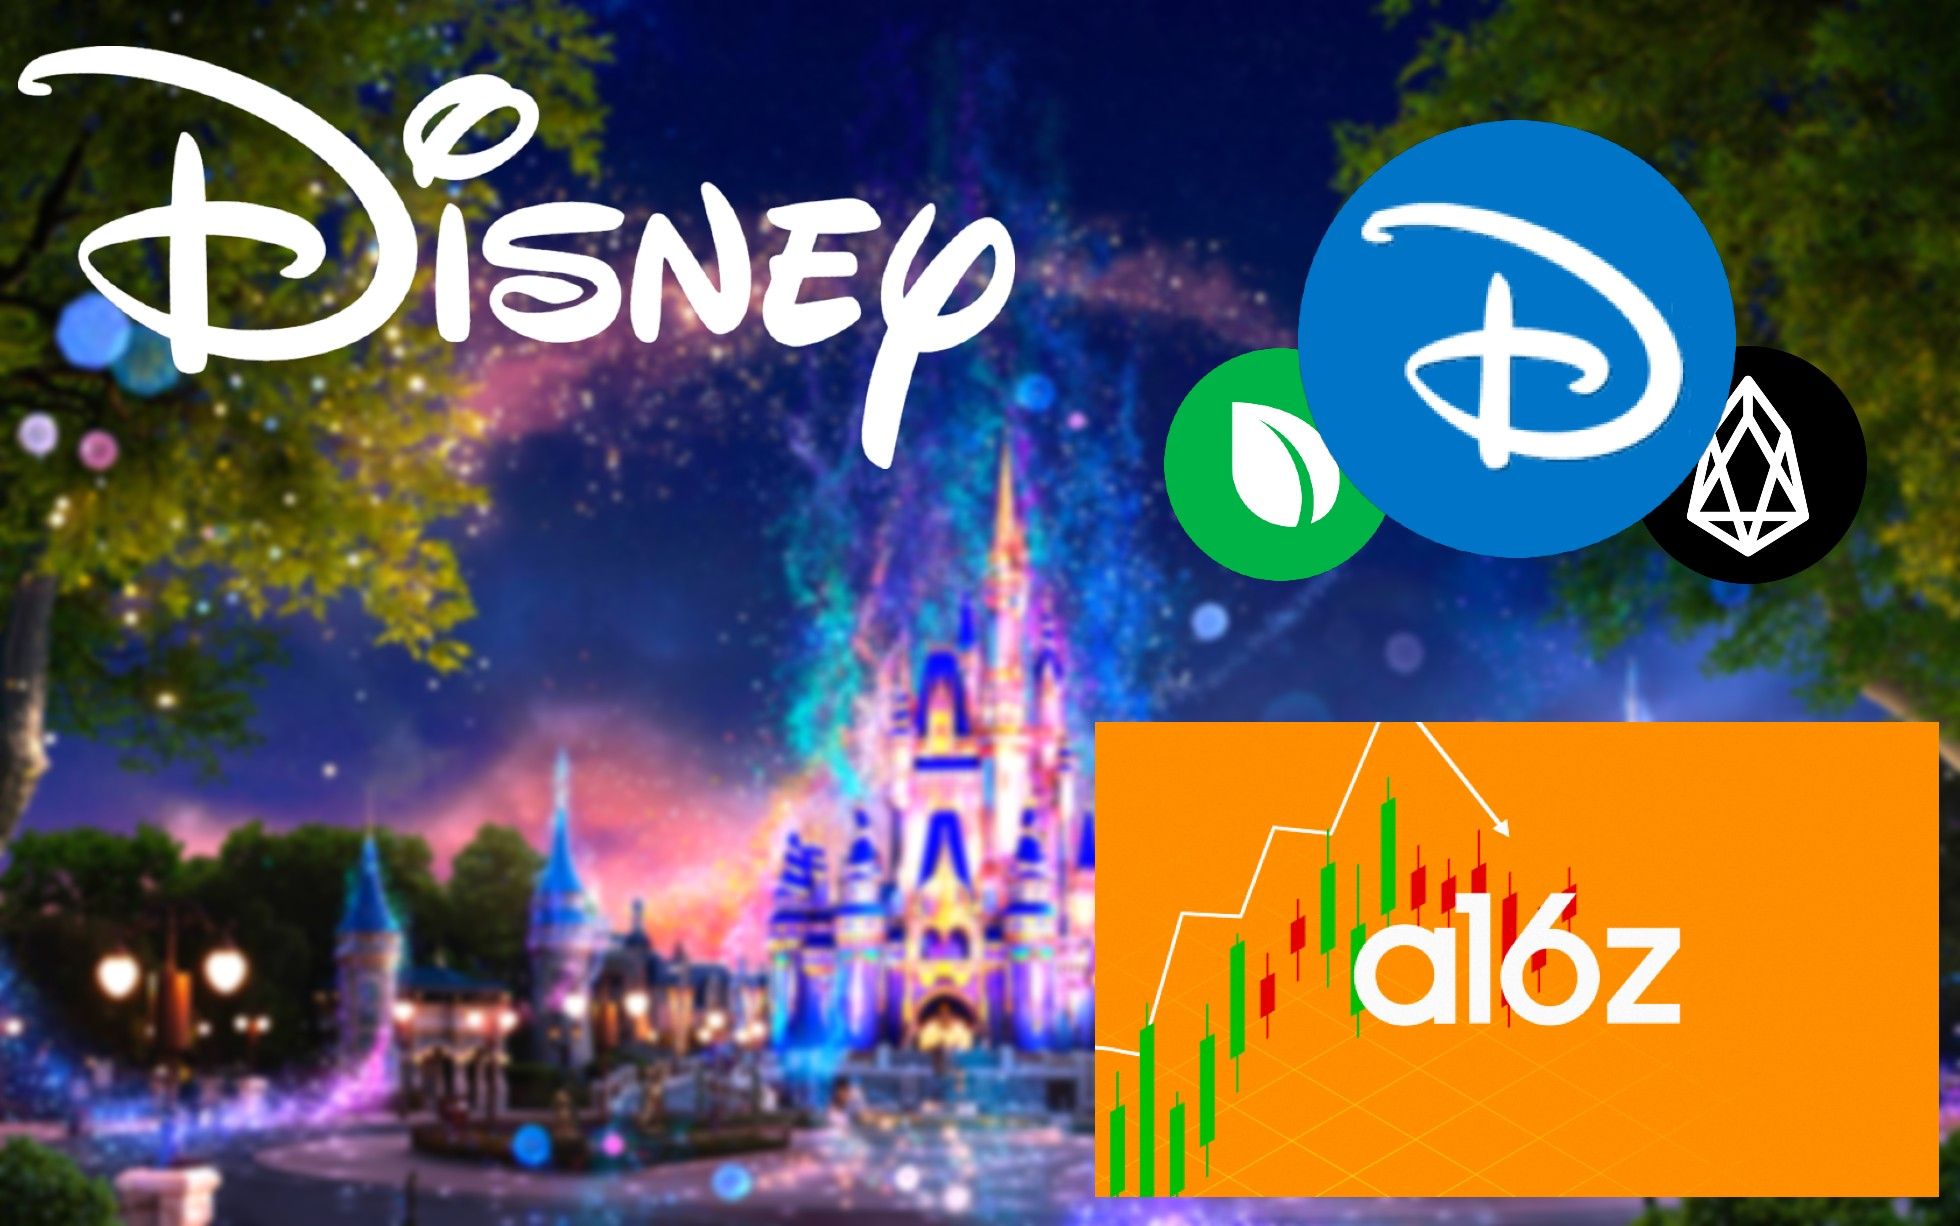 Disney Acquires A16Z: Plans to Relaunch Classic Cryptos But With Trans Women of Color Founders